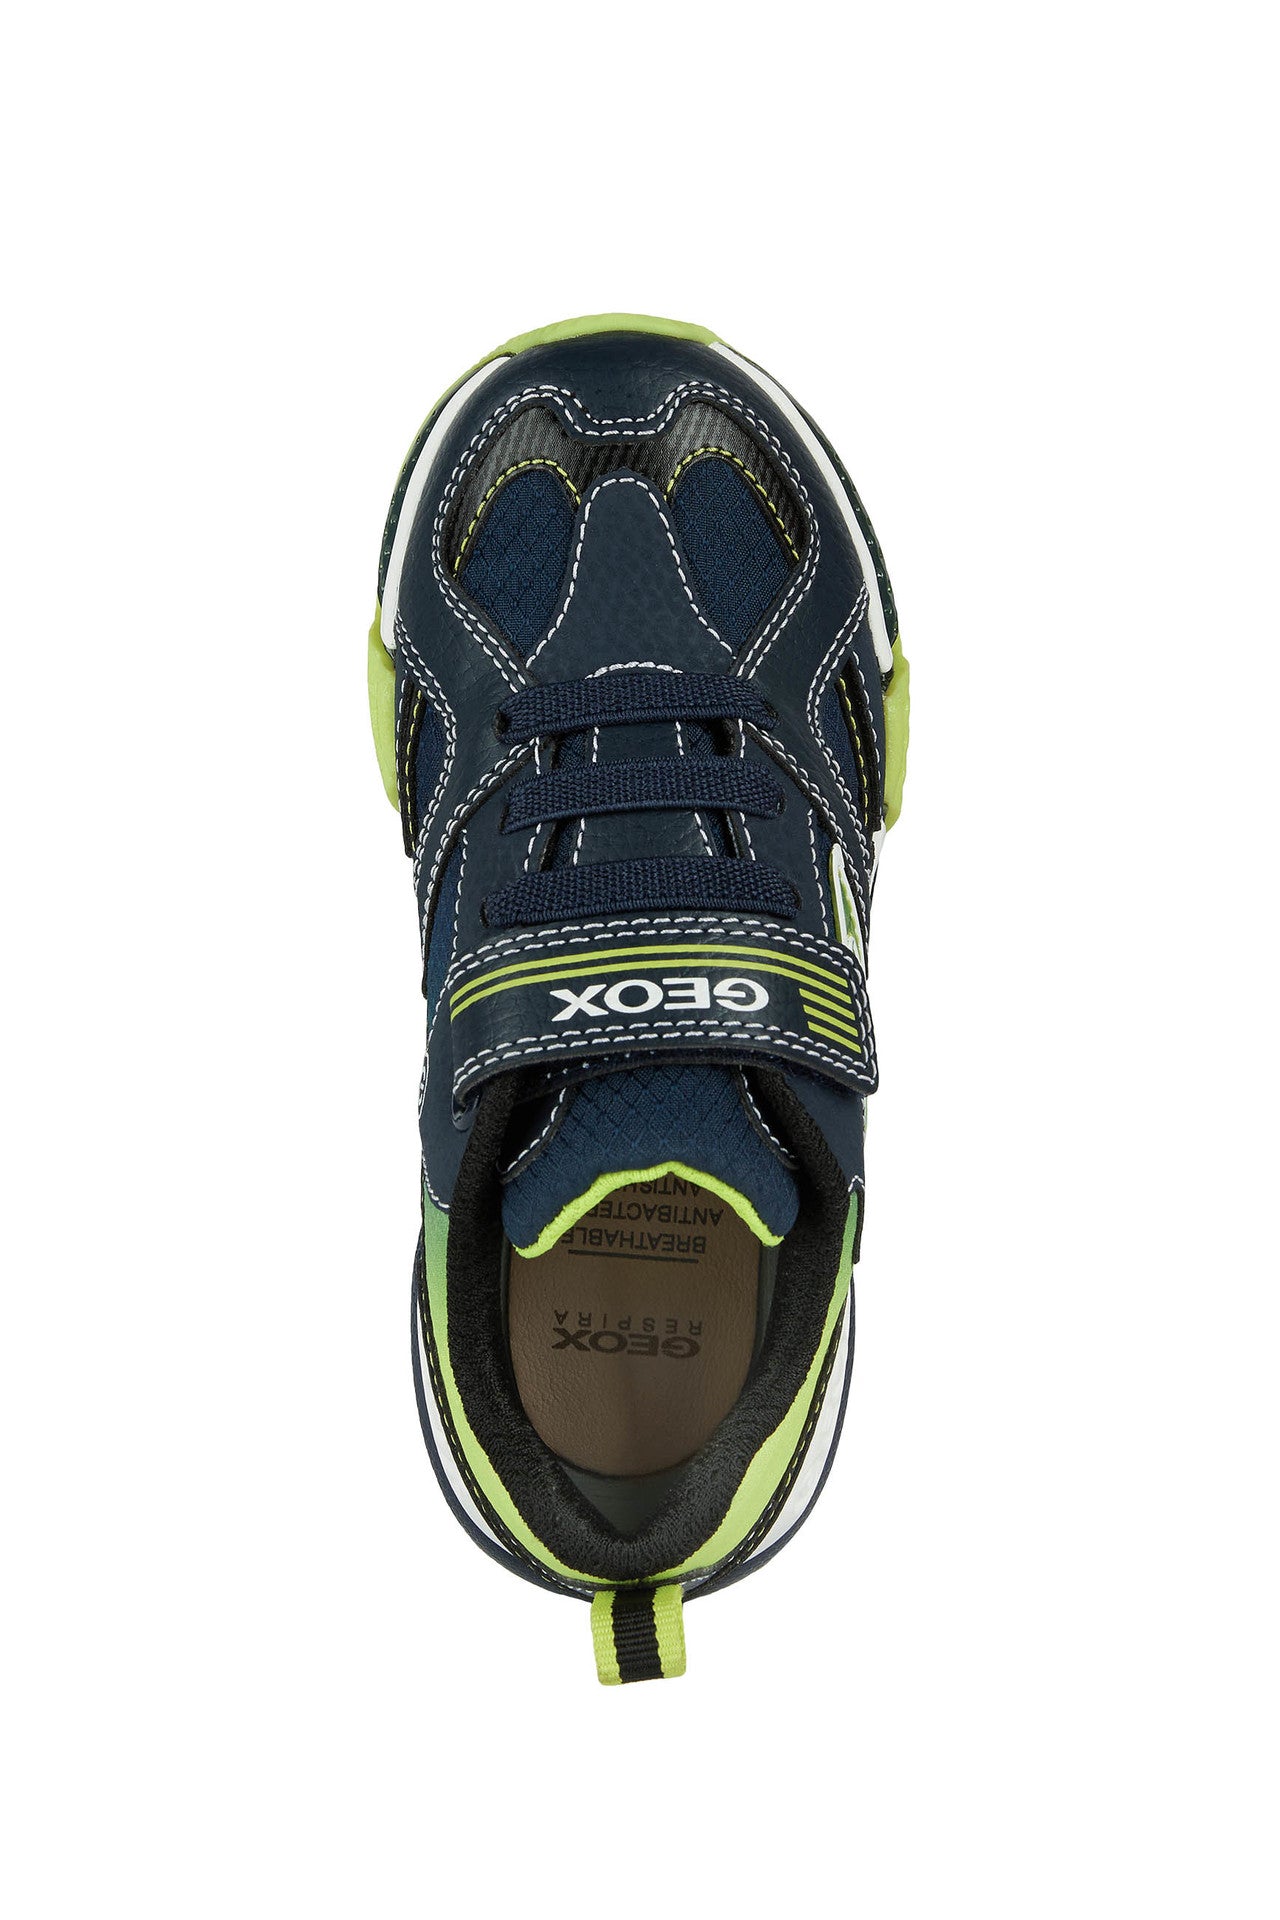 GEOX Bayonyc Navy/Lime Light-up Trainer J16FEA